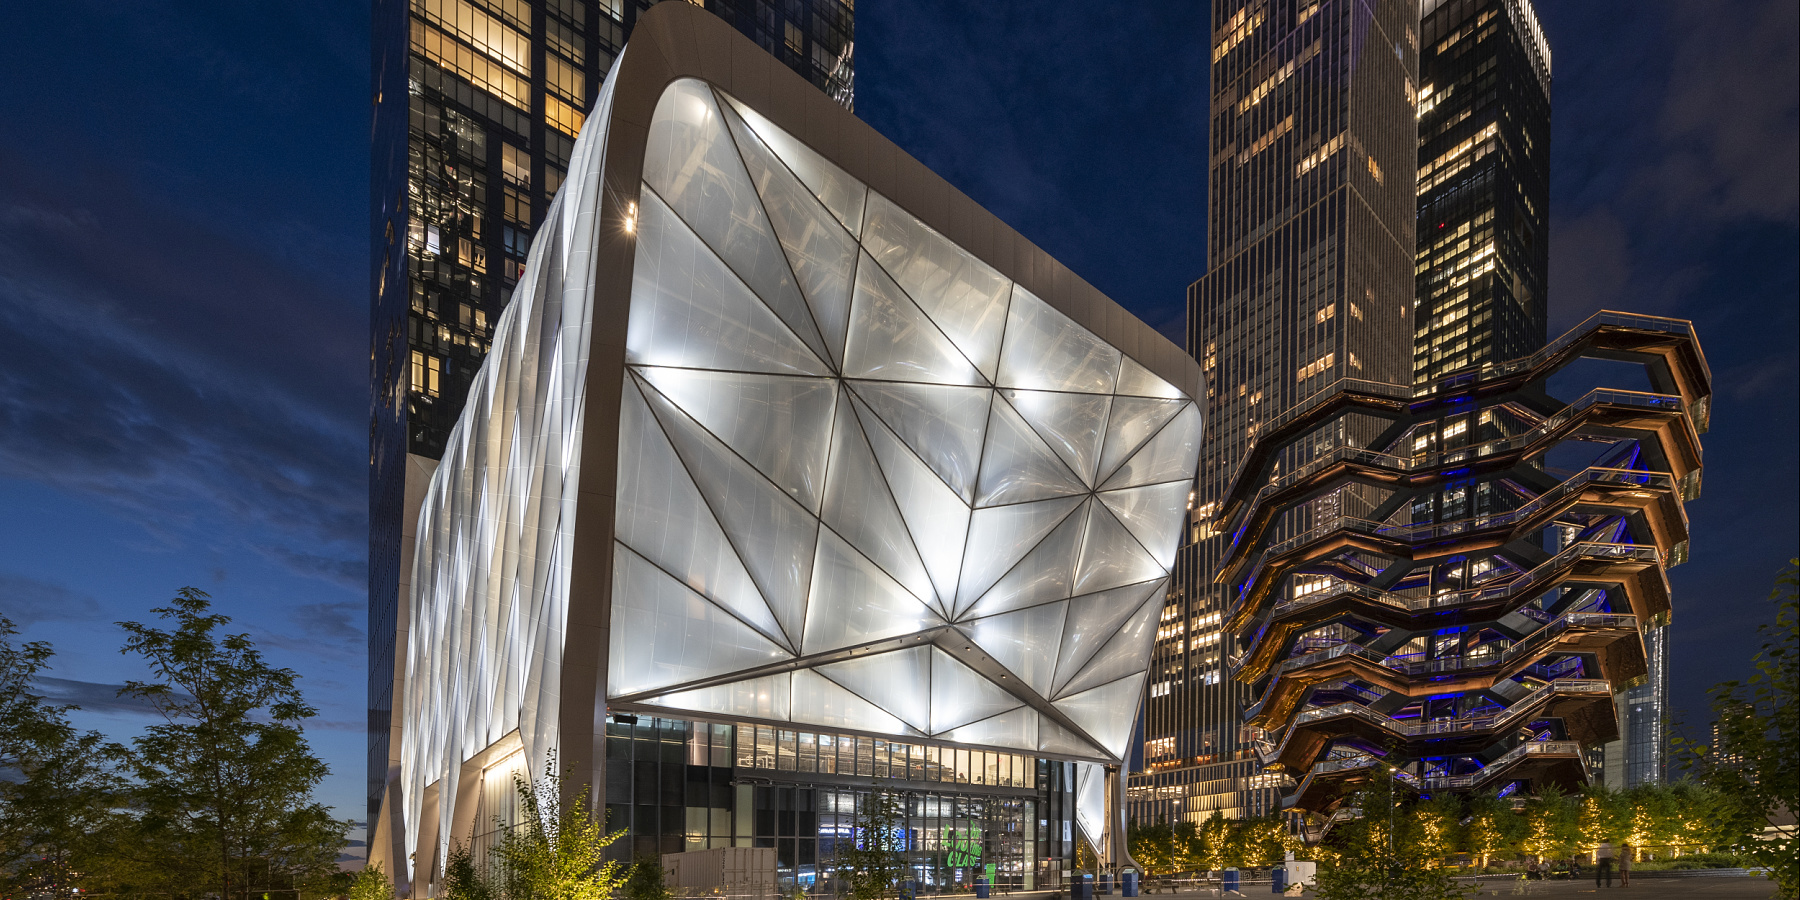 The Shed/Hudson Yards, New York City / ERCO, New York City, Hudson Yards, Verenigde Staten